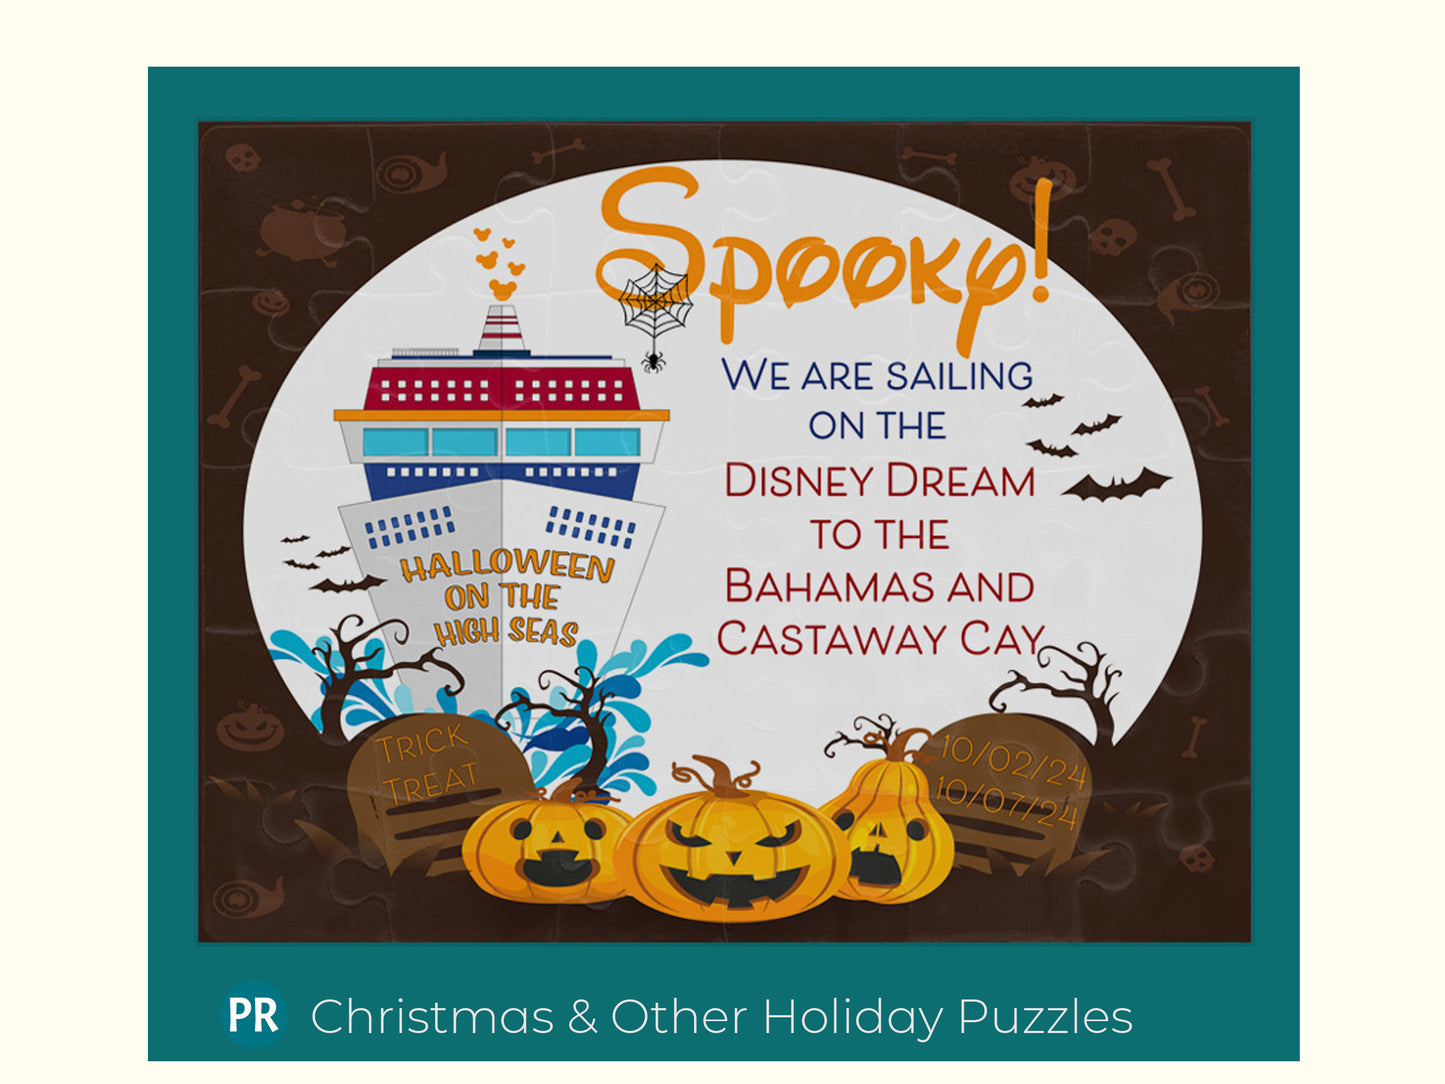 Disney Halloween Cruise Ship announcement jigsaw puzzle. This puzzle has a Halloween background with a Disney Cruise Ship titled Halloween On The Seas. Also on the puzzle is the vacation trip details and the date of cruise.